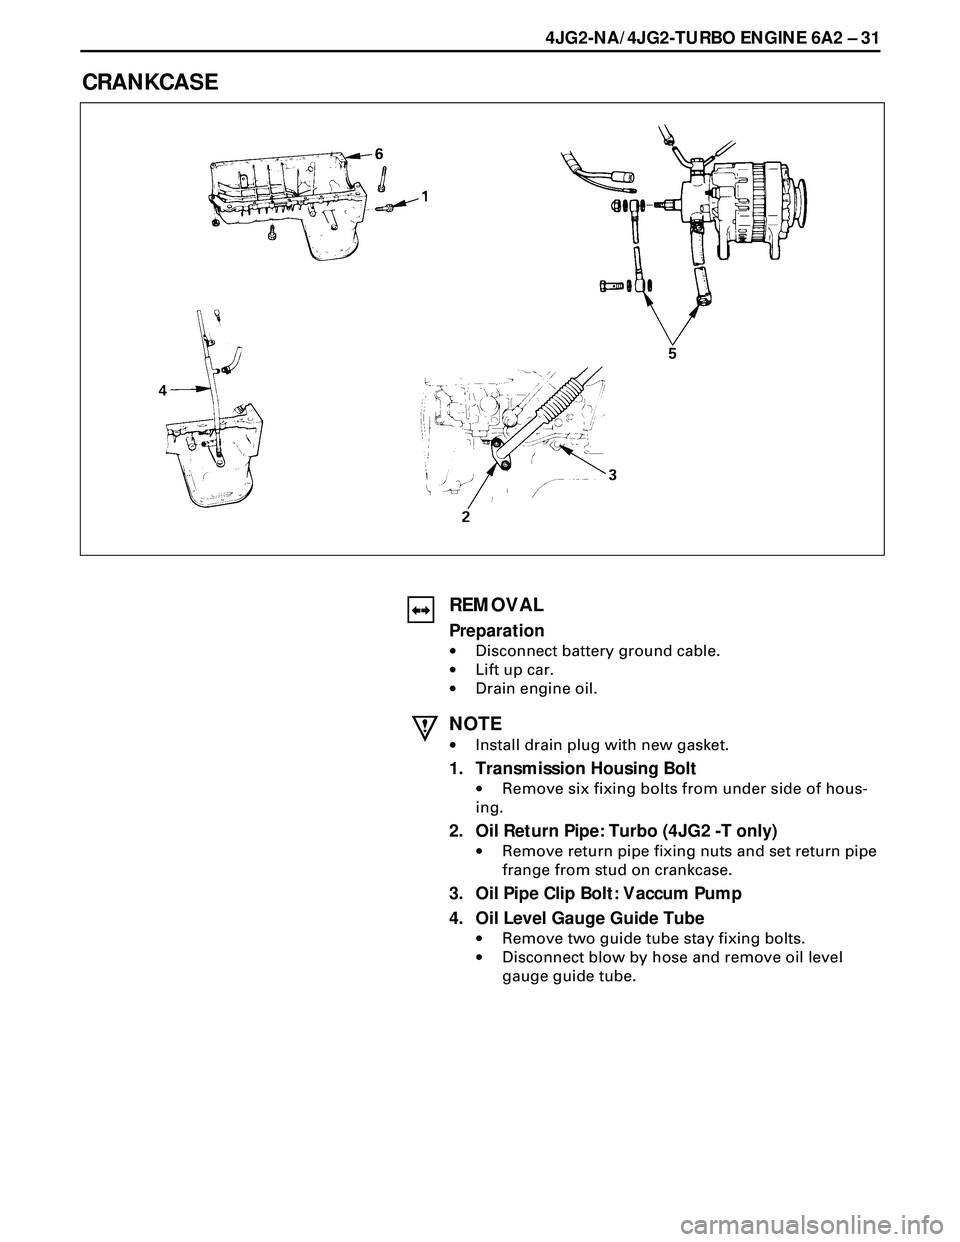 ISUZU TROOPER 1998  Service Owners Guide 4JG2-NA/4JG2-TURBO ENGINE 6A2 Ð 31
CRANKCASE
REMOVAL
Preparation
·Disconnect battery ground cable.
·Lift up car.
·Drain engine oil.
NOTE
·Install drain plug with new gasket.
1. Transmission Housi